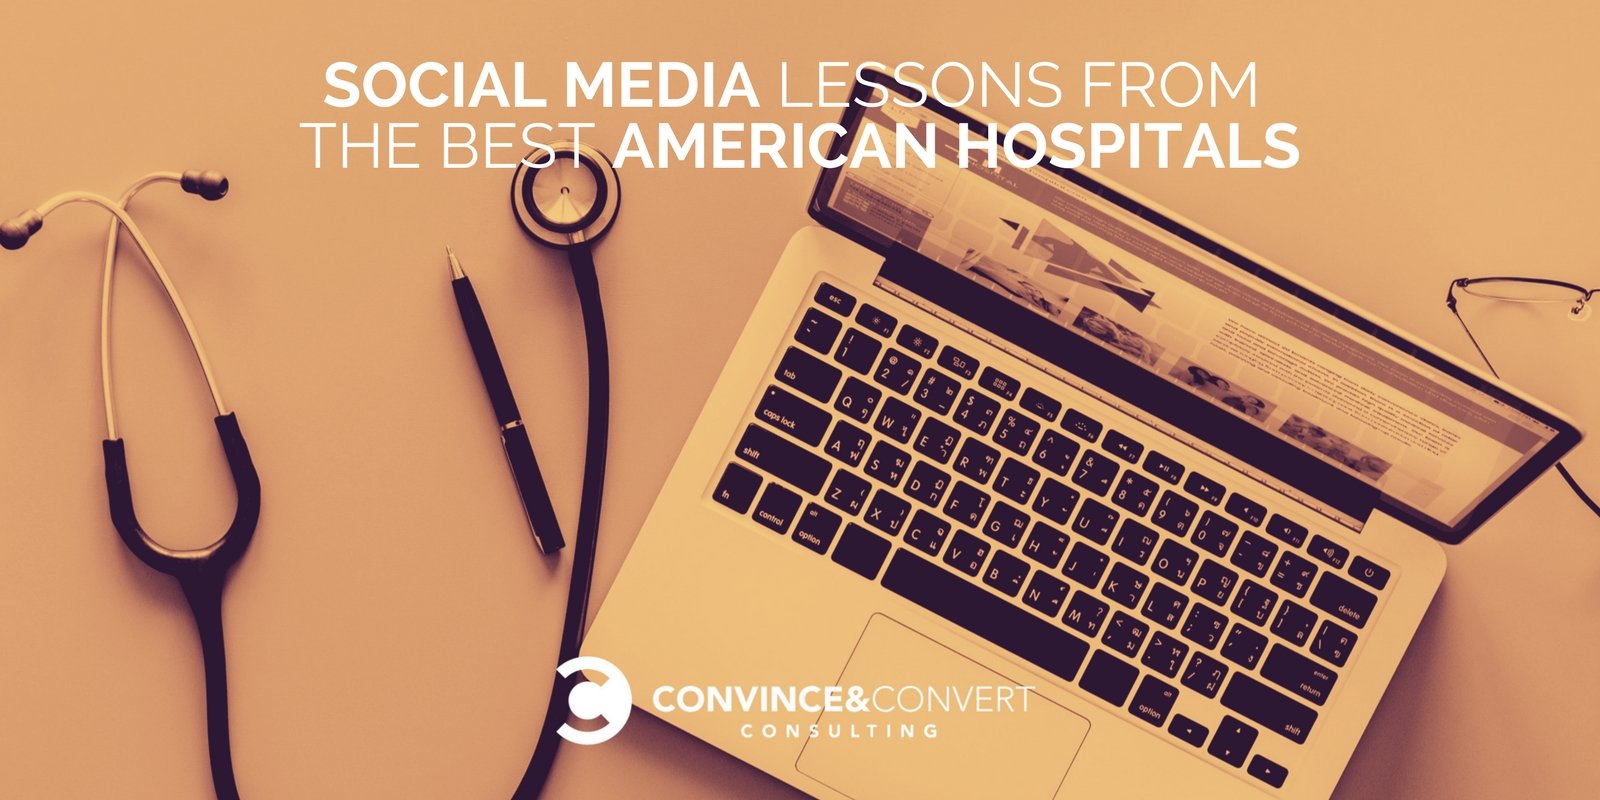 Social Media Lessons from the Best American Hospitals